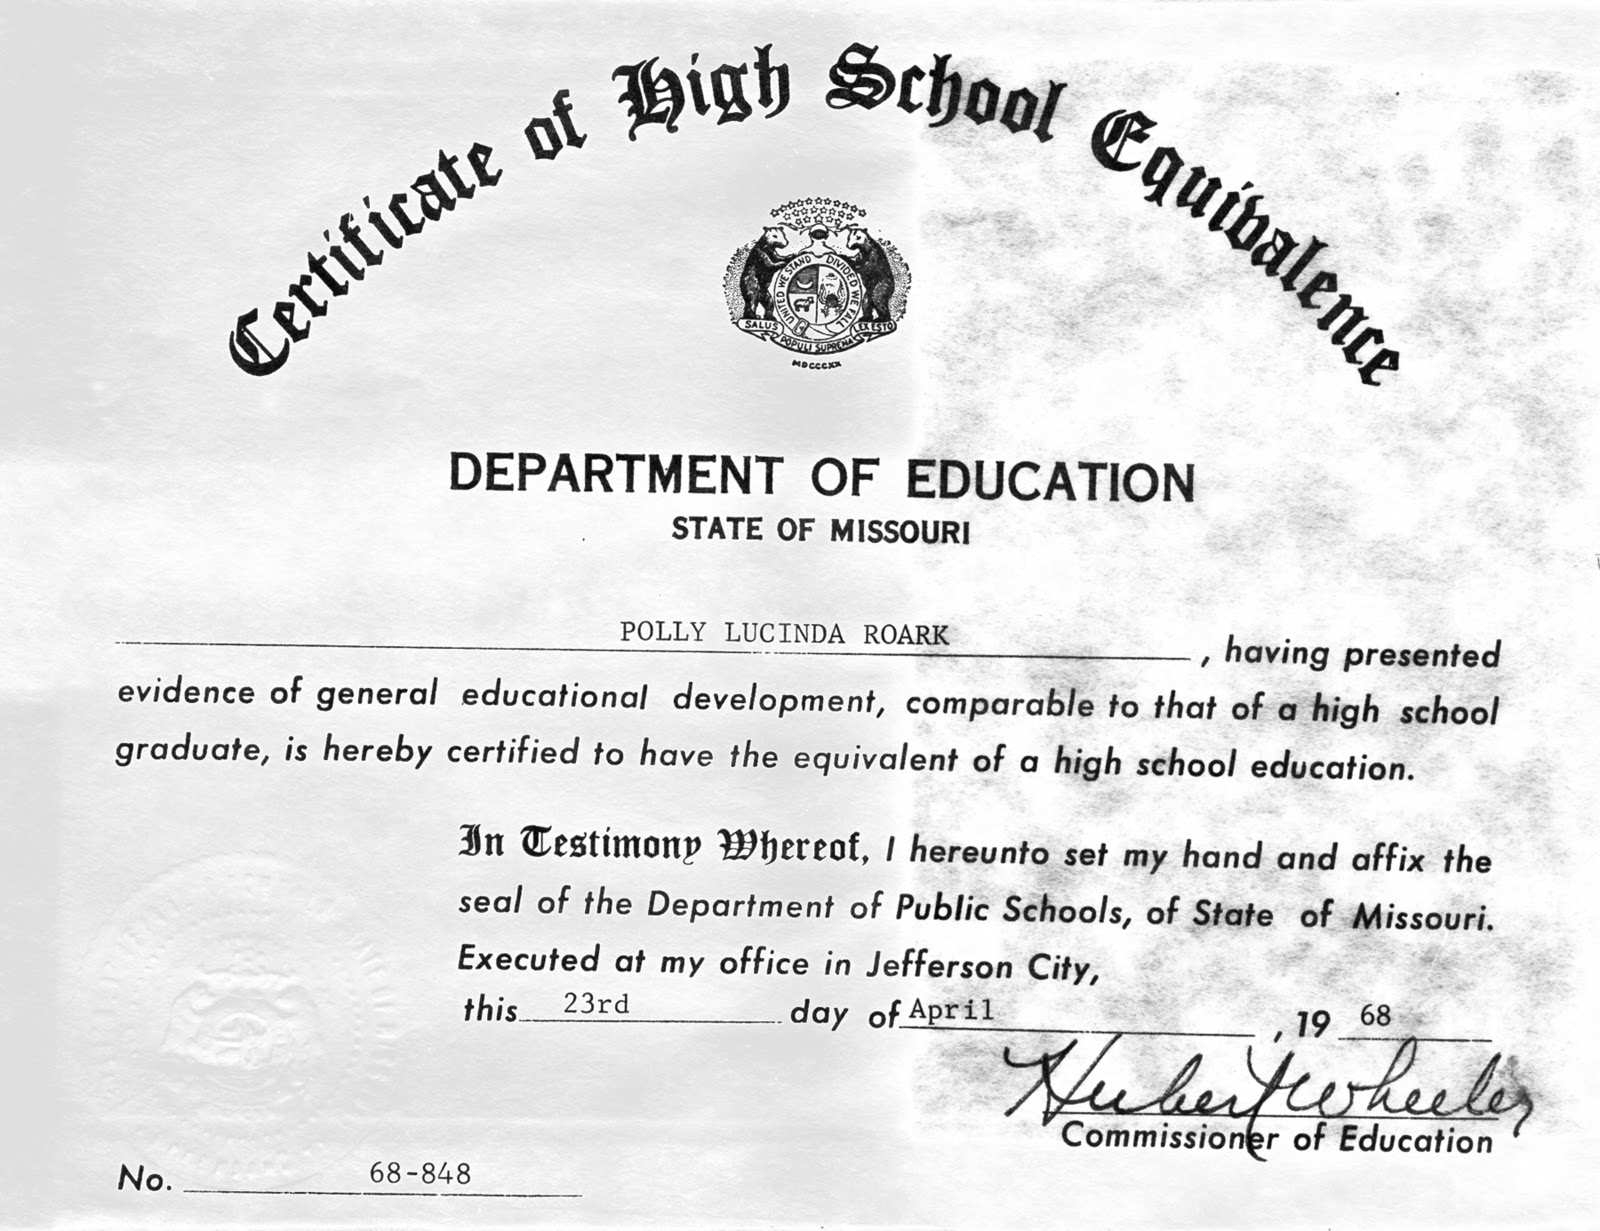 Printable Fake Ged Certificate For Free New Ged Certificate Line To - Printable Fake Ged Certificate For Free